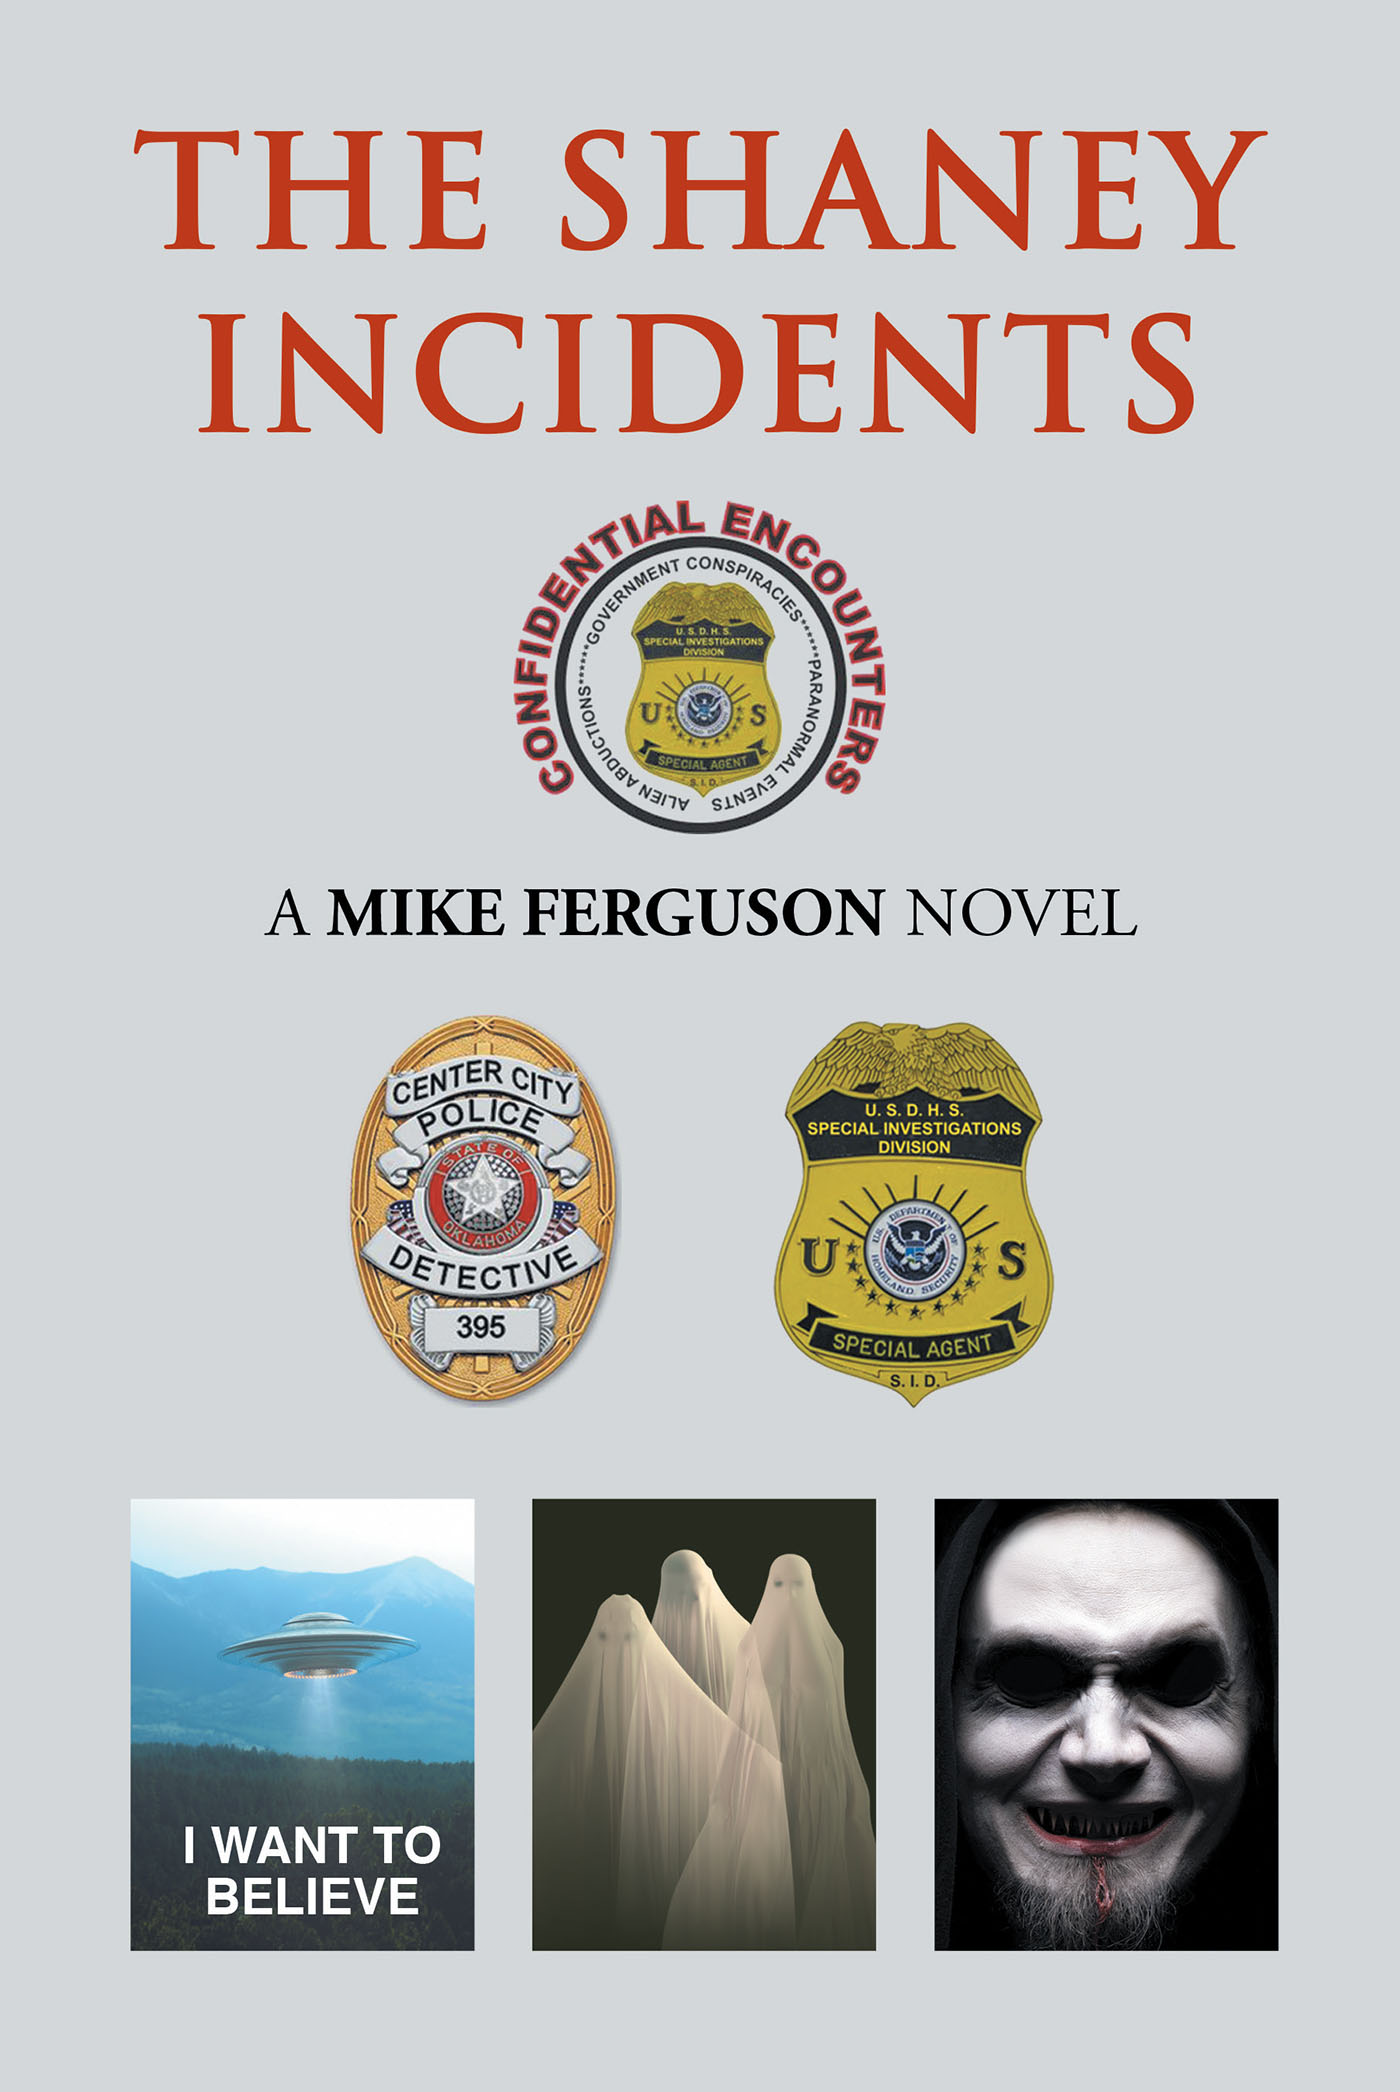 Author Mike Ferguson’s New Book, “The Shaney Incidents,” is Fast-Paced Thriller Following a Team of Investigators on a Mission to Solve an Eerie Paranormal Mystery